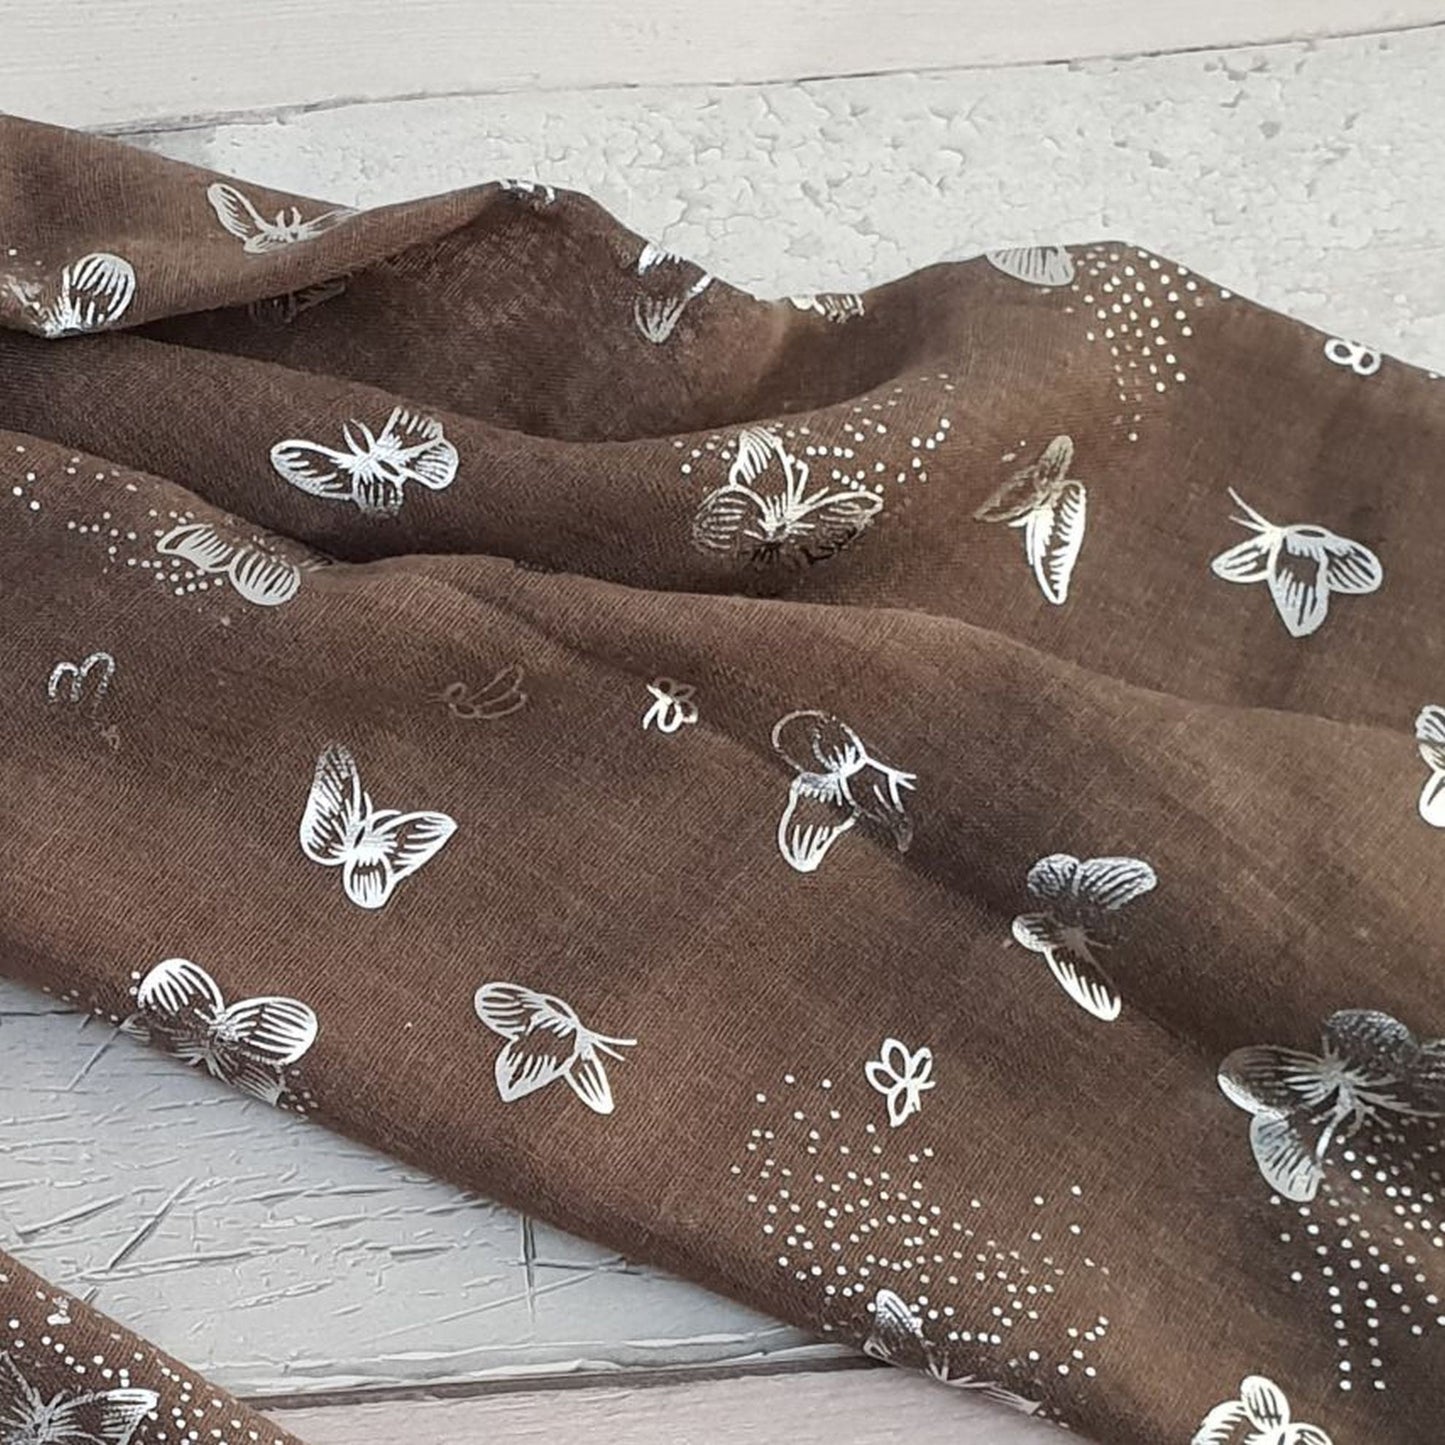 Close up Photo of khaki coloured scarf covered in metallic Silver butterflies